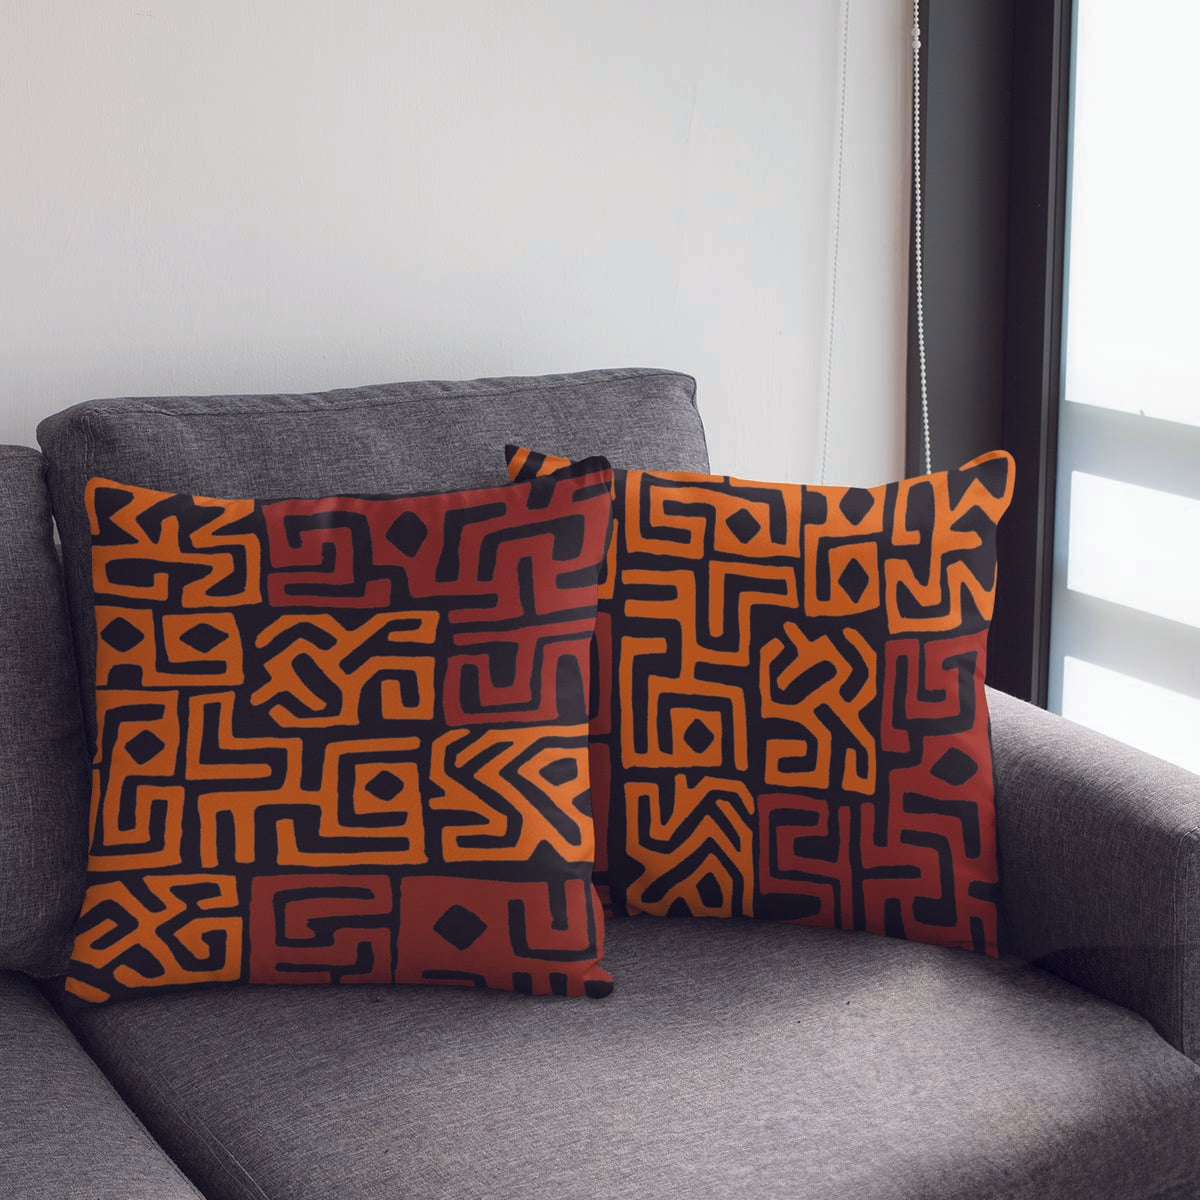 African Print Cushion Pillow Case Cover in Kuba Brown